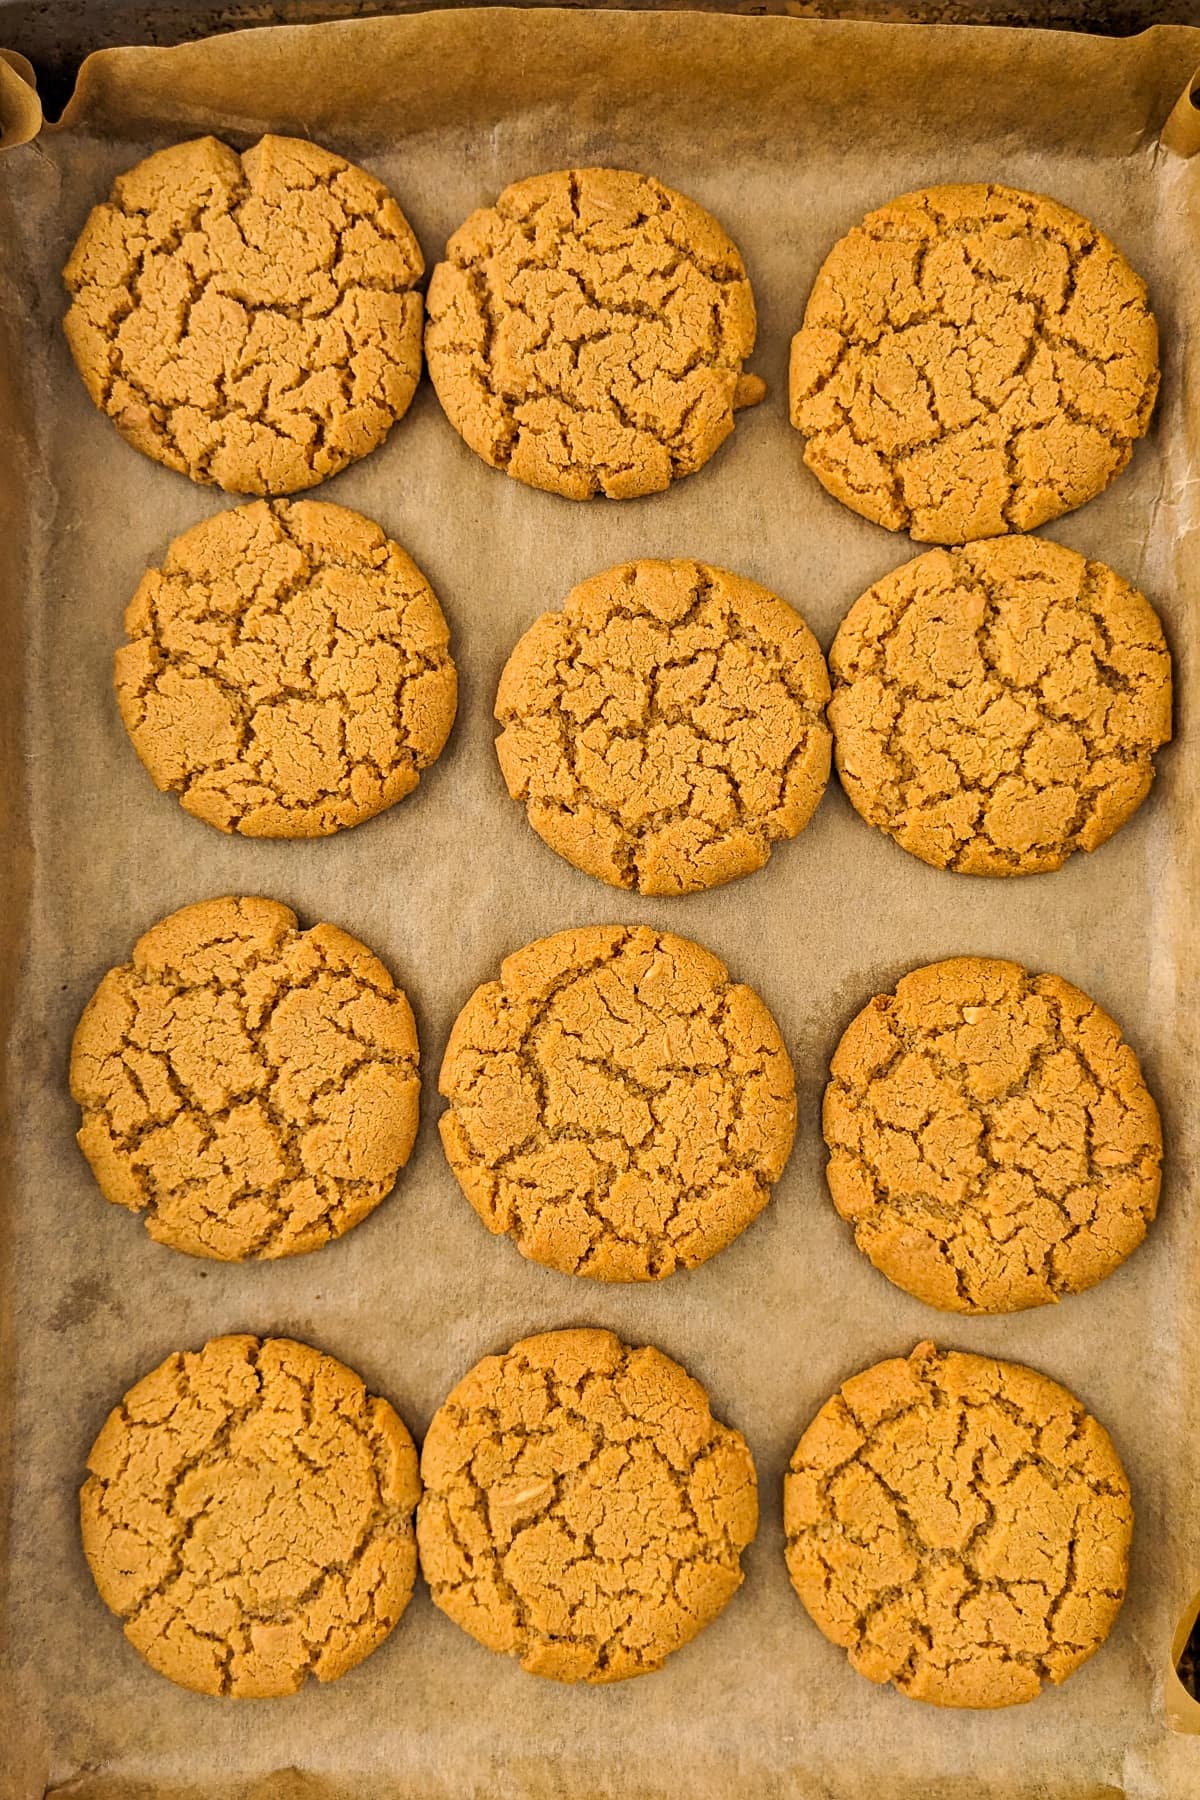 Top view of baked peanut butter cookies on a traying bake.